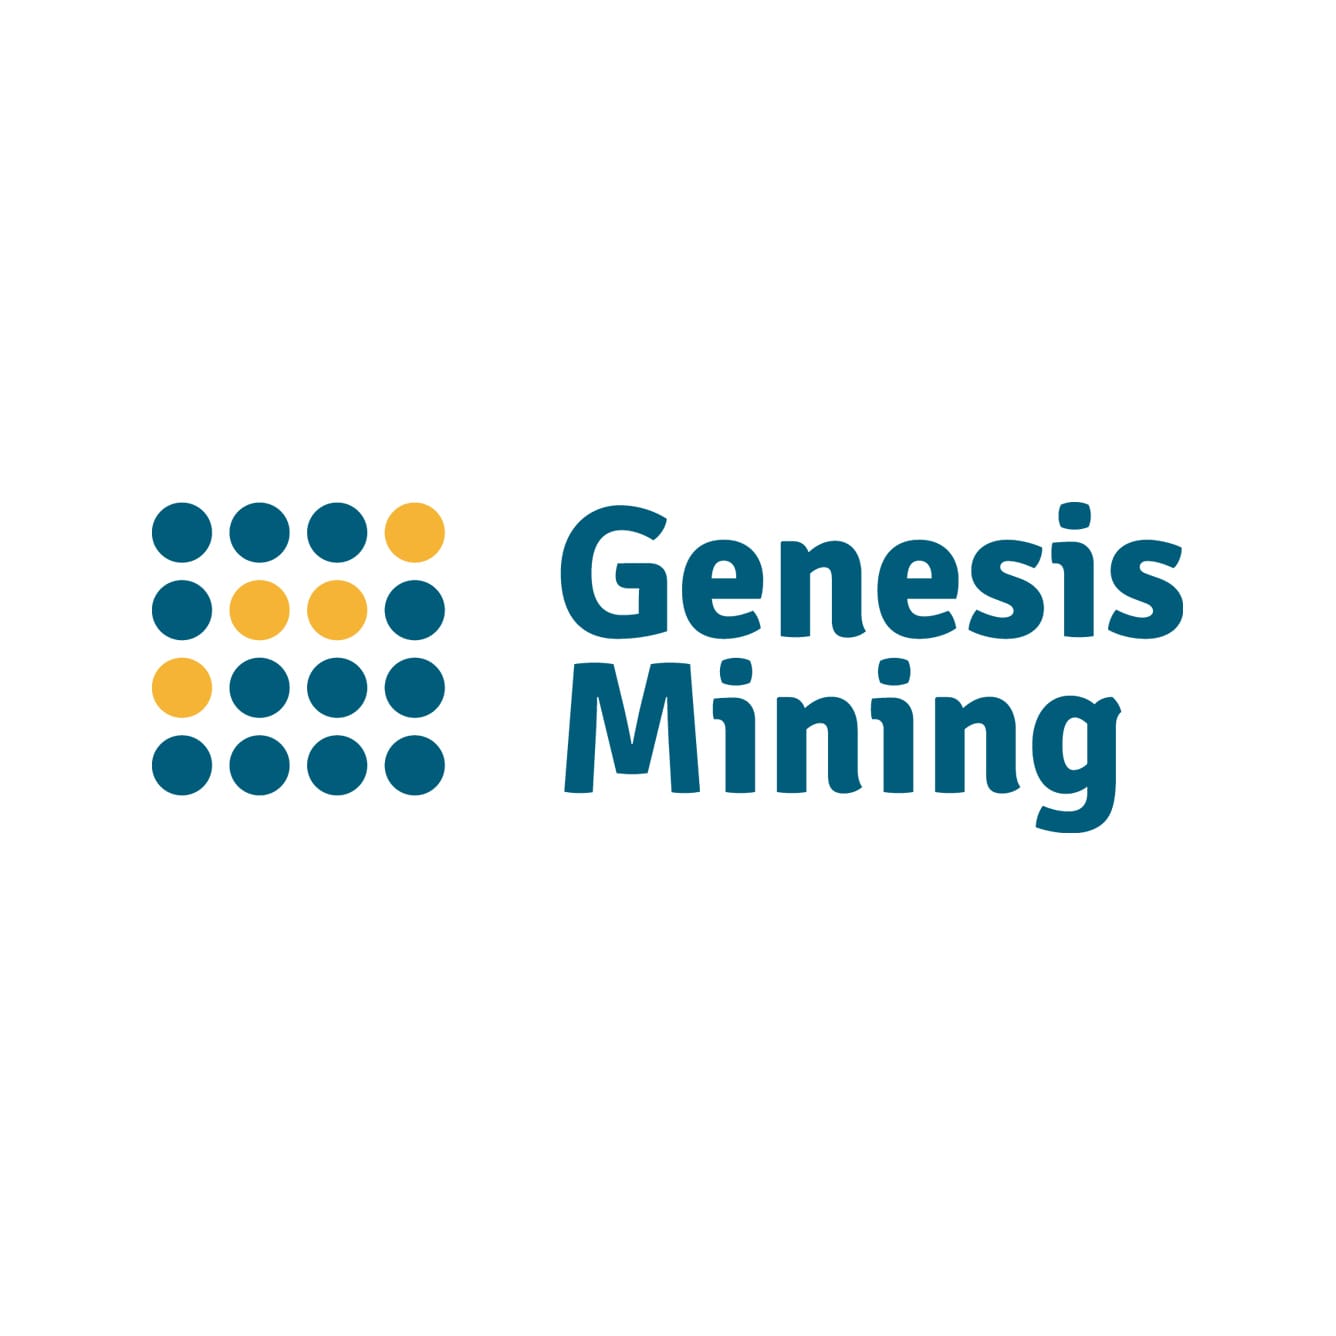 Genesis mining Referrals, Promo Codes, Rewards ••• 3% discount on any purchase • March 